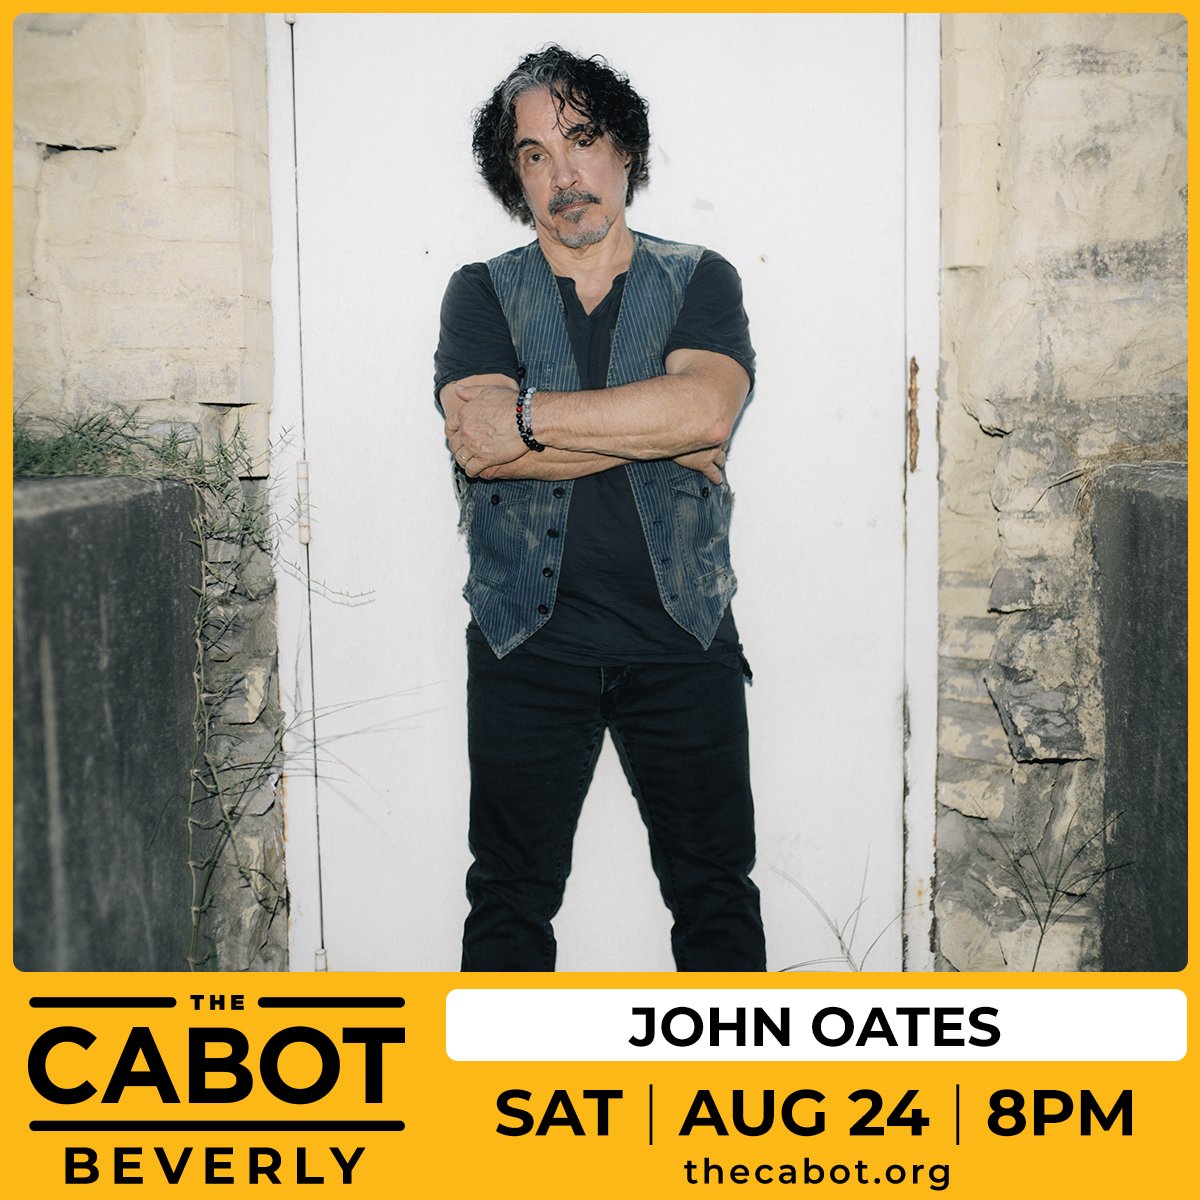 Coming up later this summer: A night of songs and stories with the one and only @JohnOates! The co-founder of the iconic group Hall & Oates heads to The Cabot on August 2, sharing songs new and old, stories from the road, and more. thecabot.org/event/john-oat…